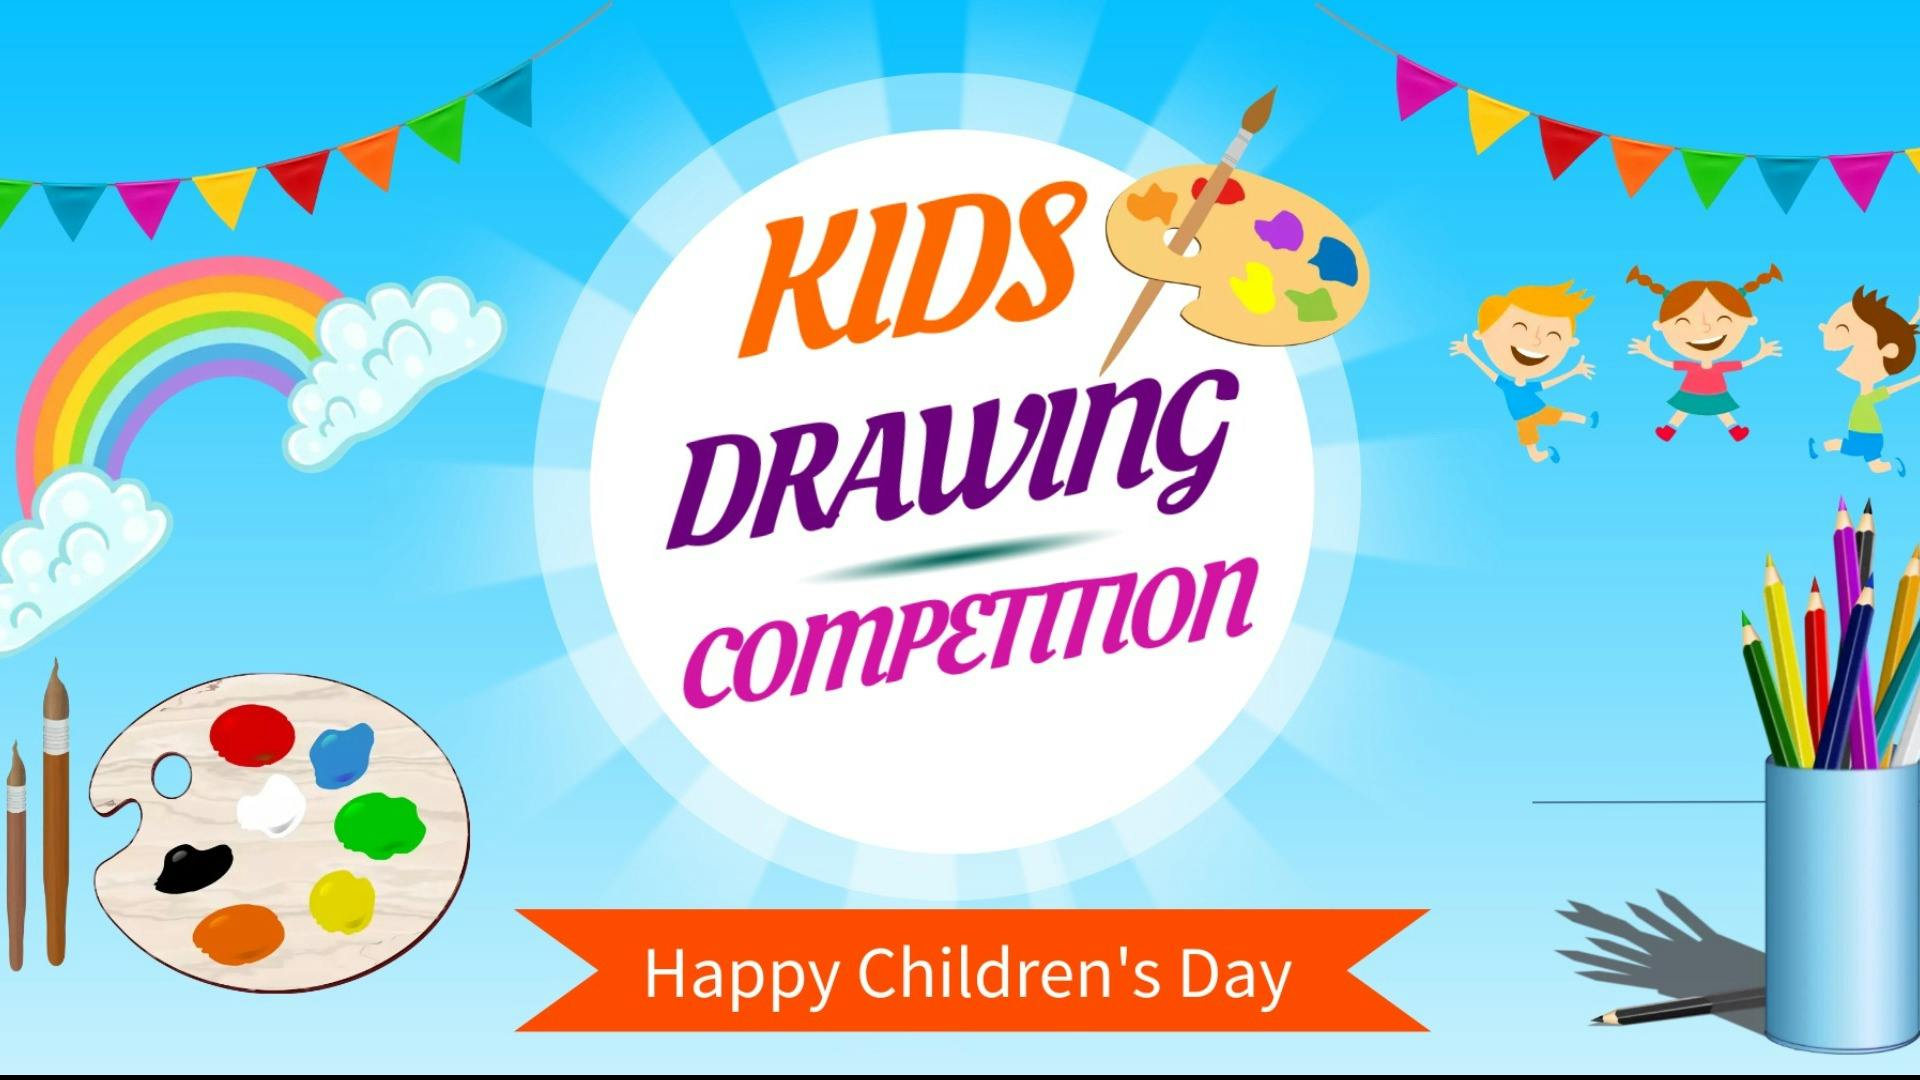 Children's drawing competition announced ahead of International Children's  Day – Human rights Ombudsman in the Donetsk People's Republic